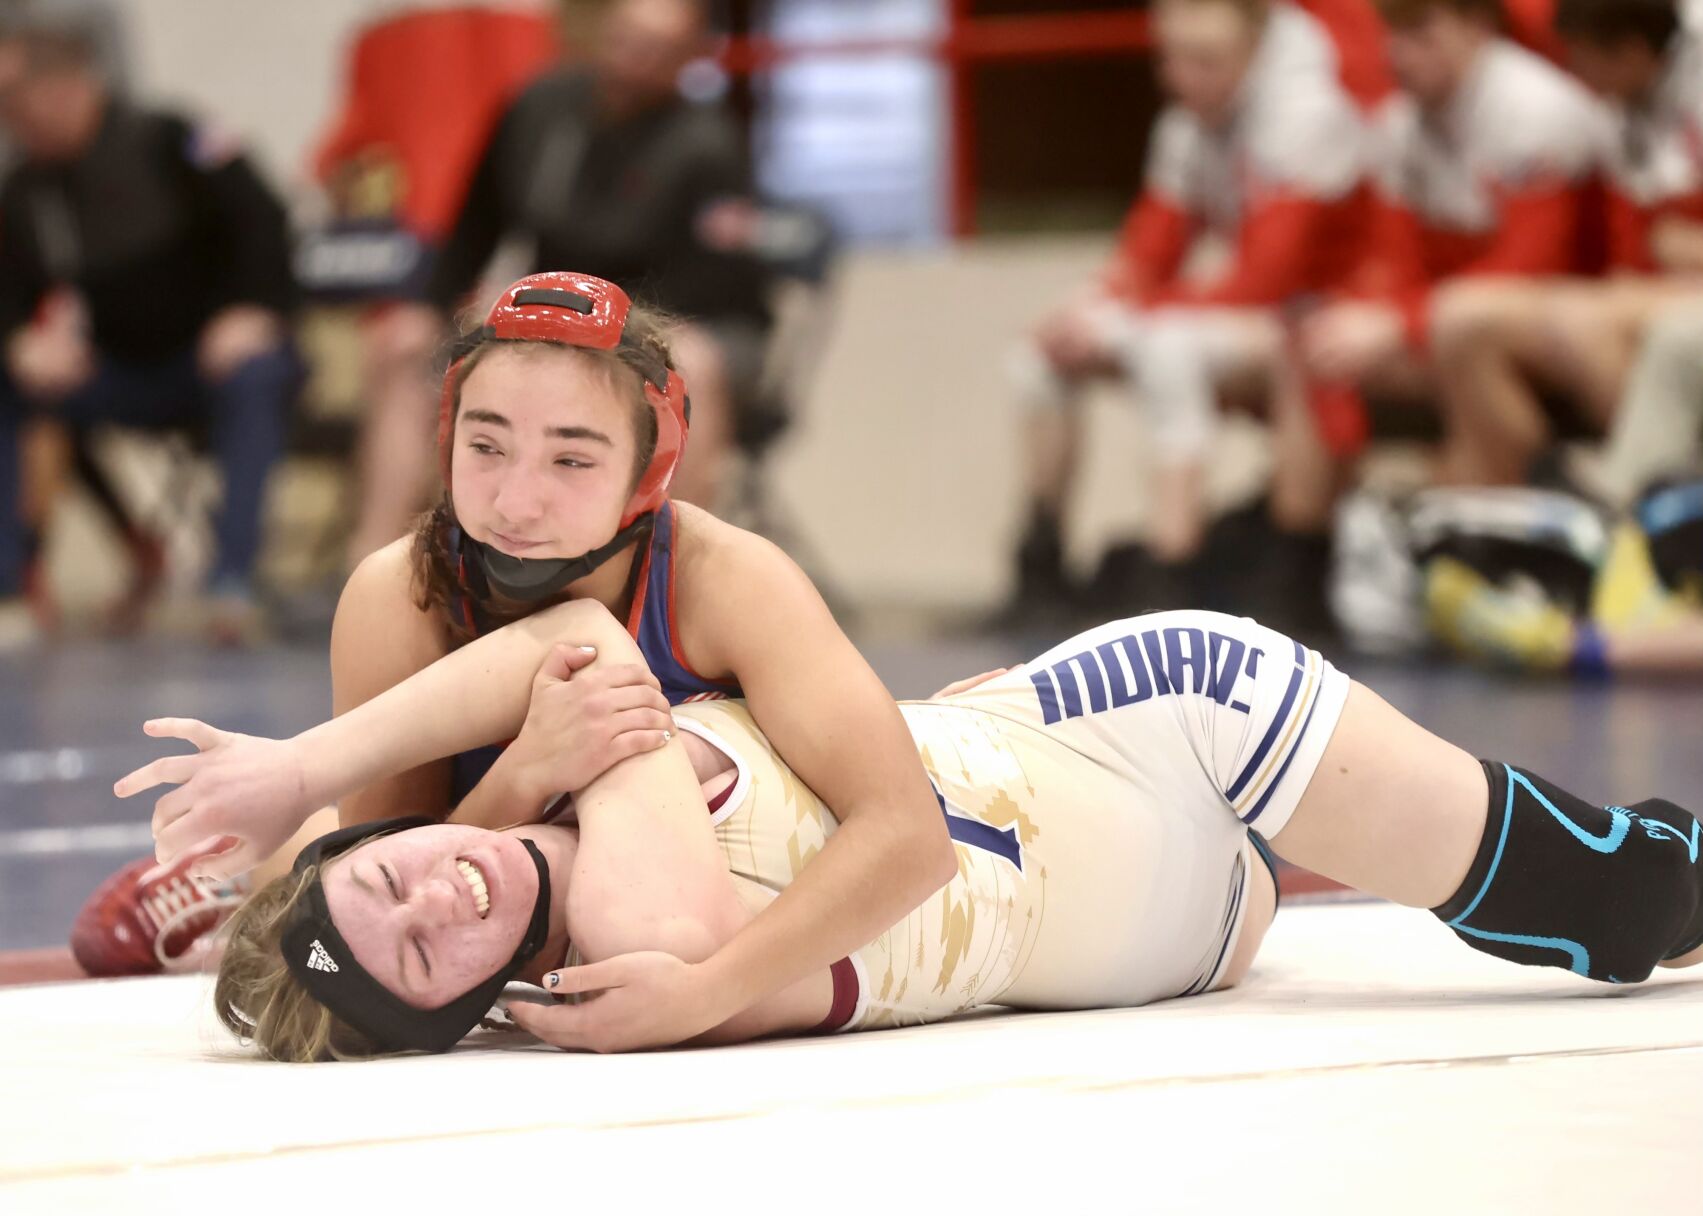 High school wrestling district competition to kick off Preps idahostatejournal